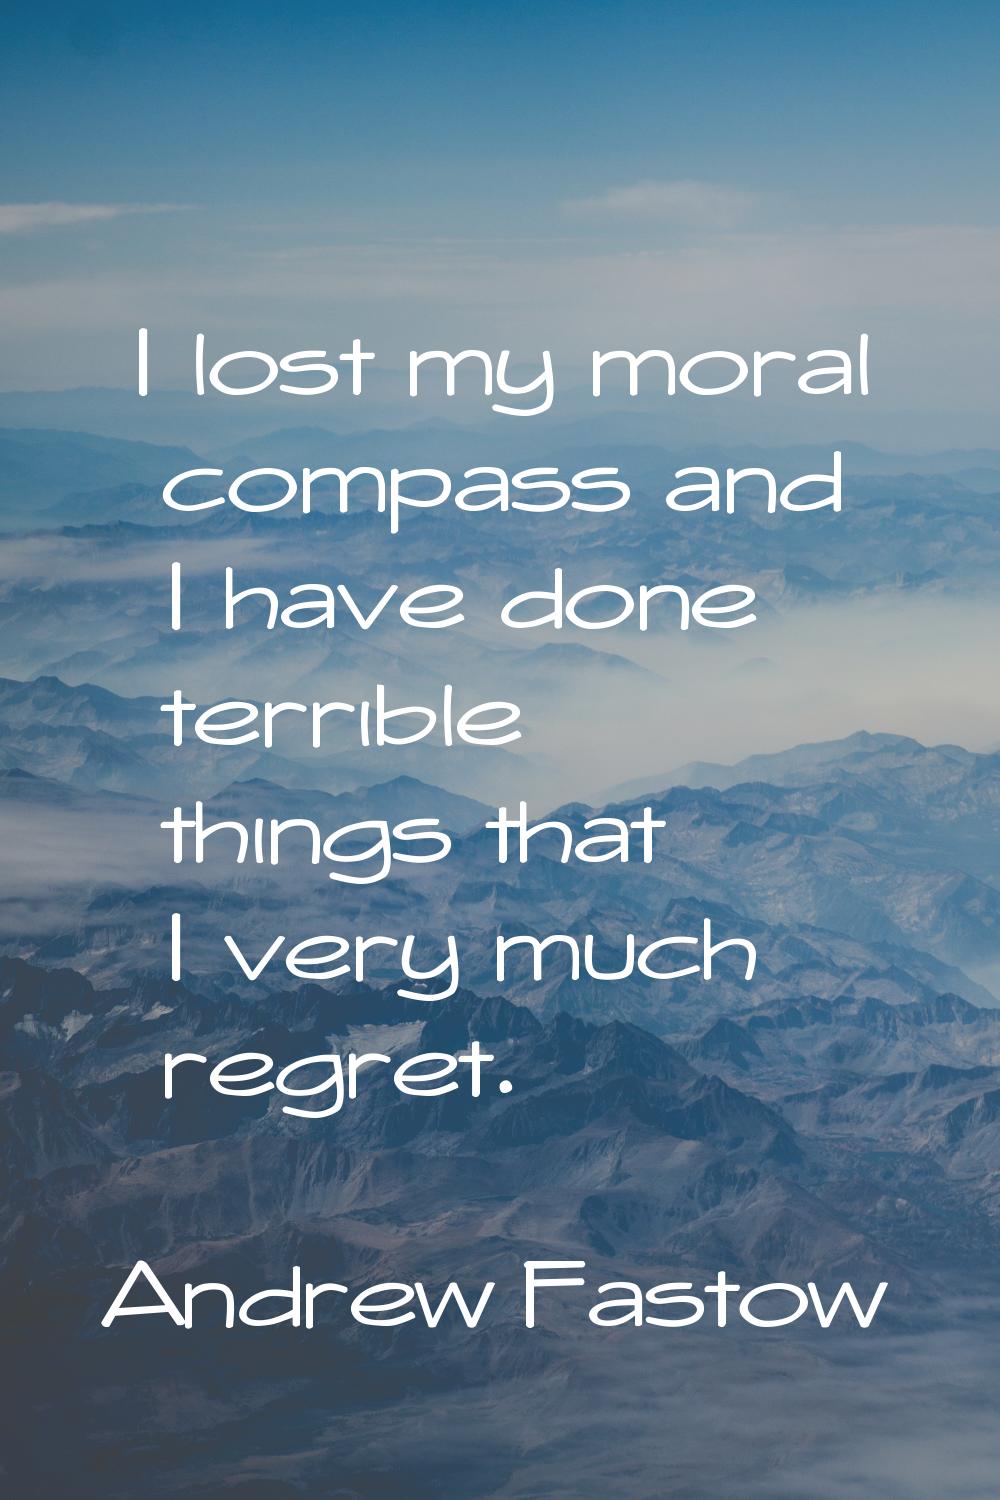 I lost my moral compass and I have done terrible things that I very much regret.